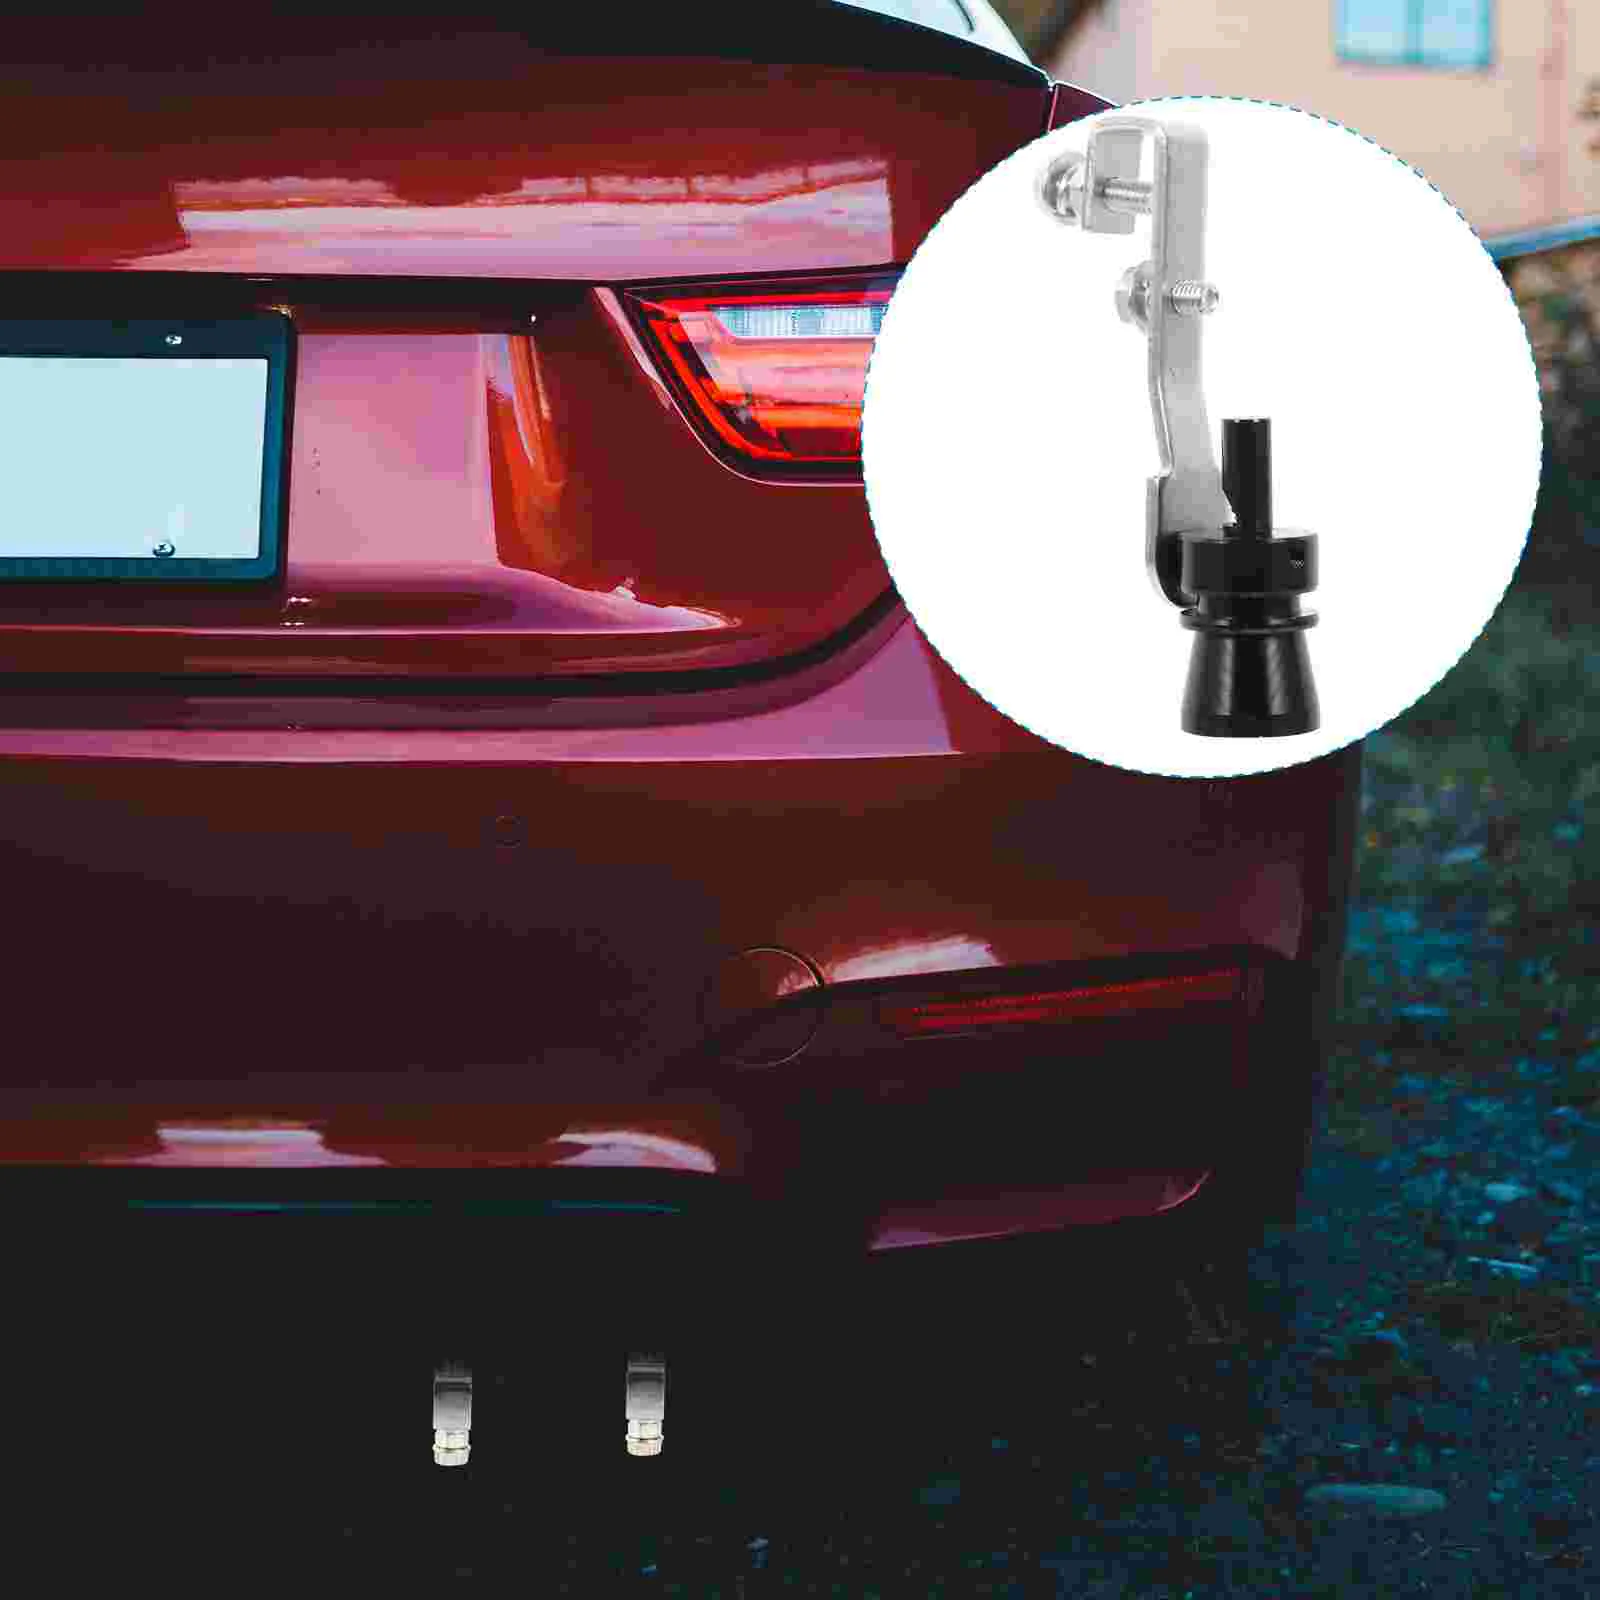 

Whistle Sound Exhaust Car Simulator Muffler Universal Blow Off Tailpipe Aluminum Booster Whistles Tail Maker Enhancer Fake Loud